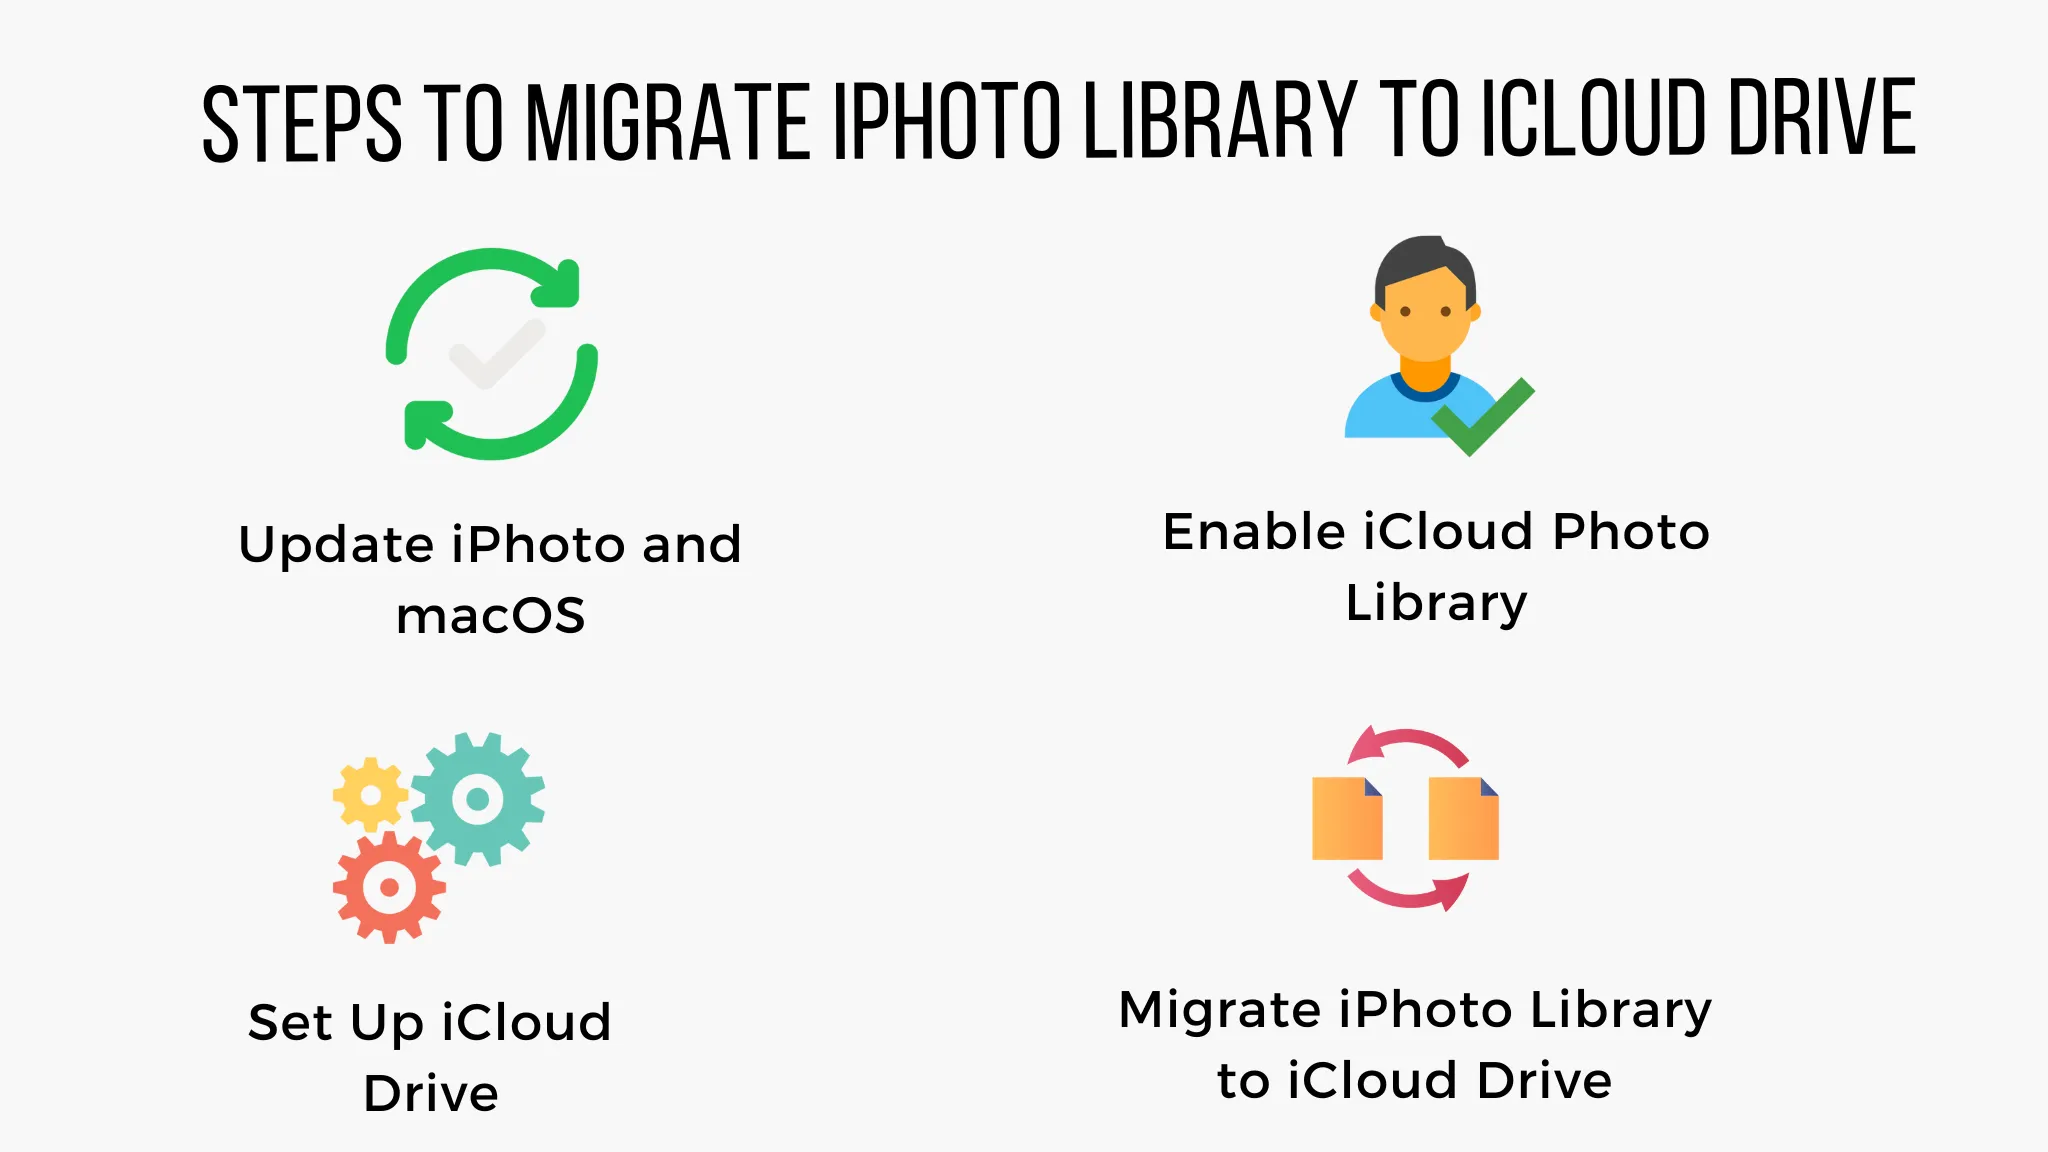 Steps to Migrate iPhoto Library to iCloud Drive